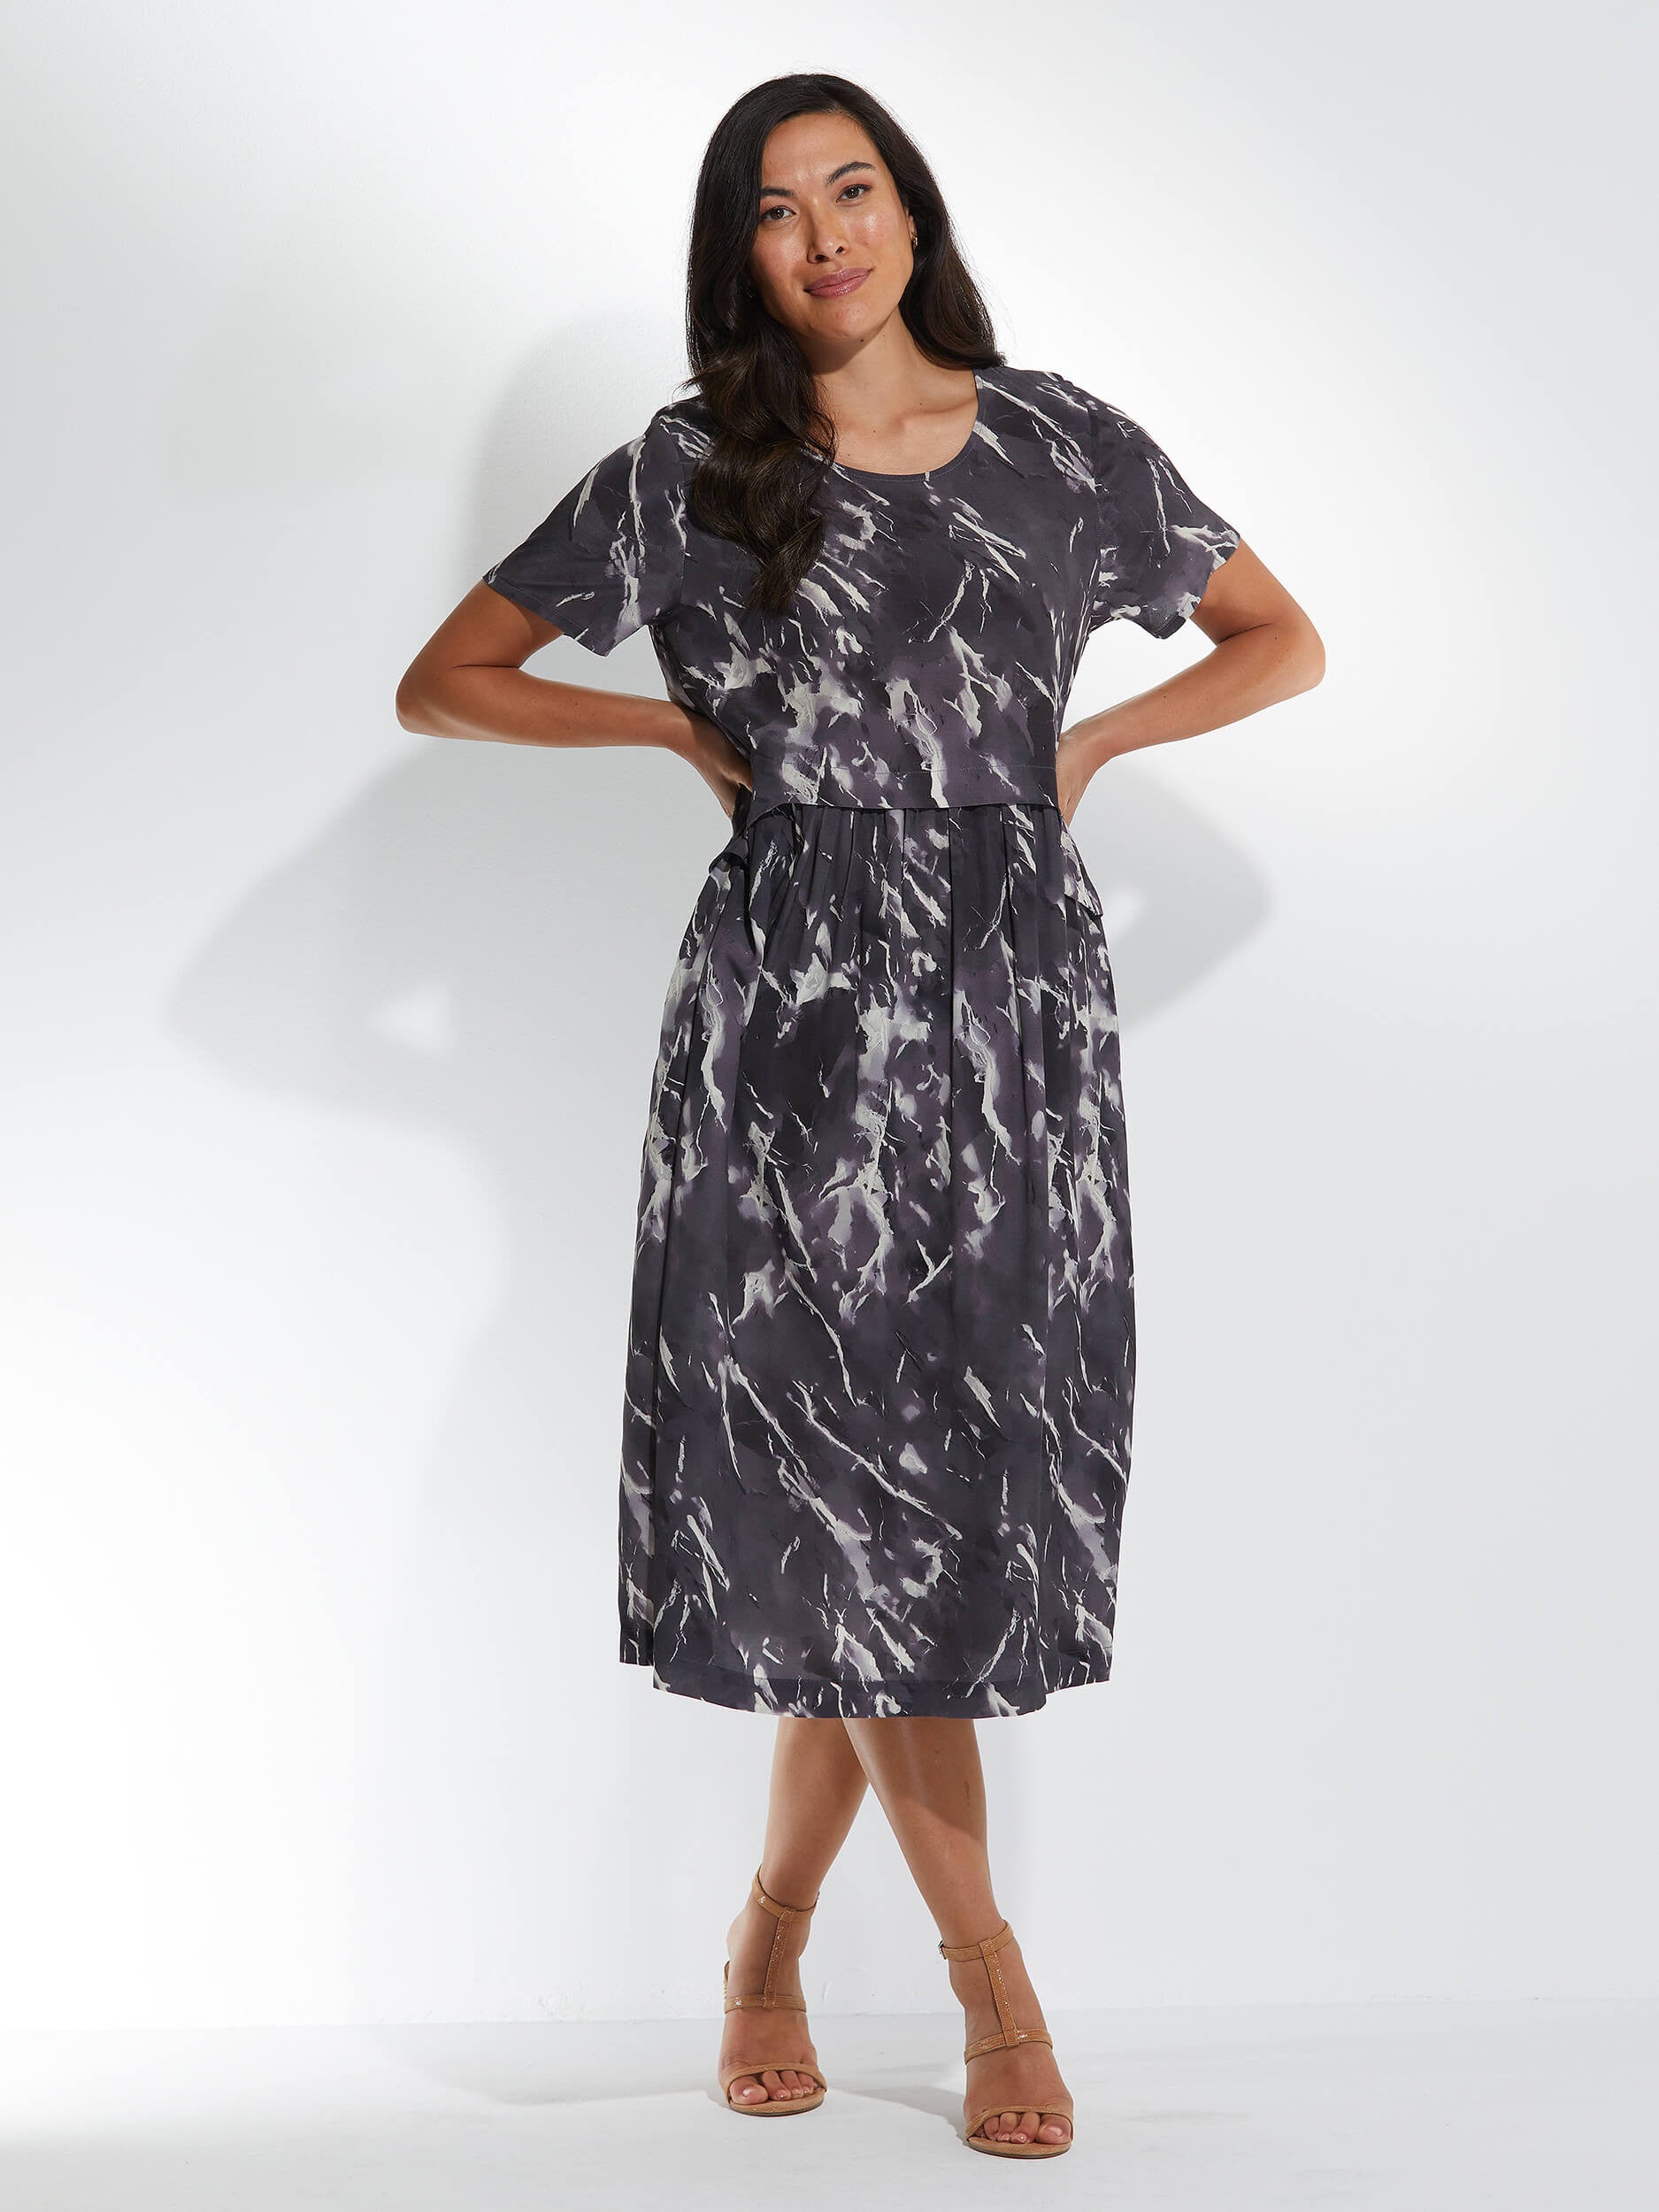 Marco Polo Washed Out Dress - Nickel